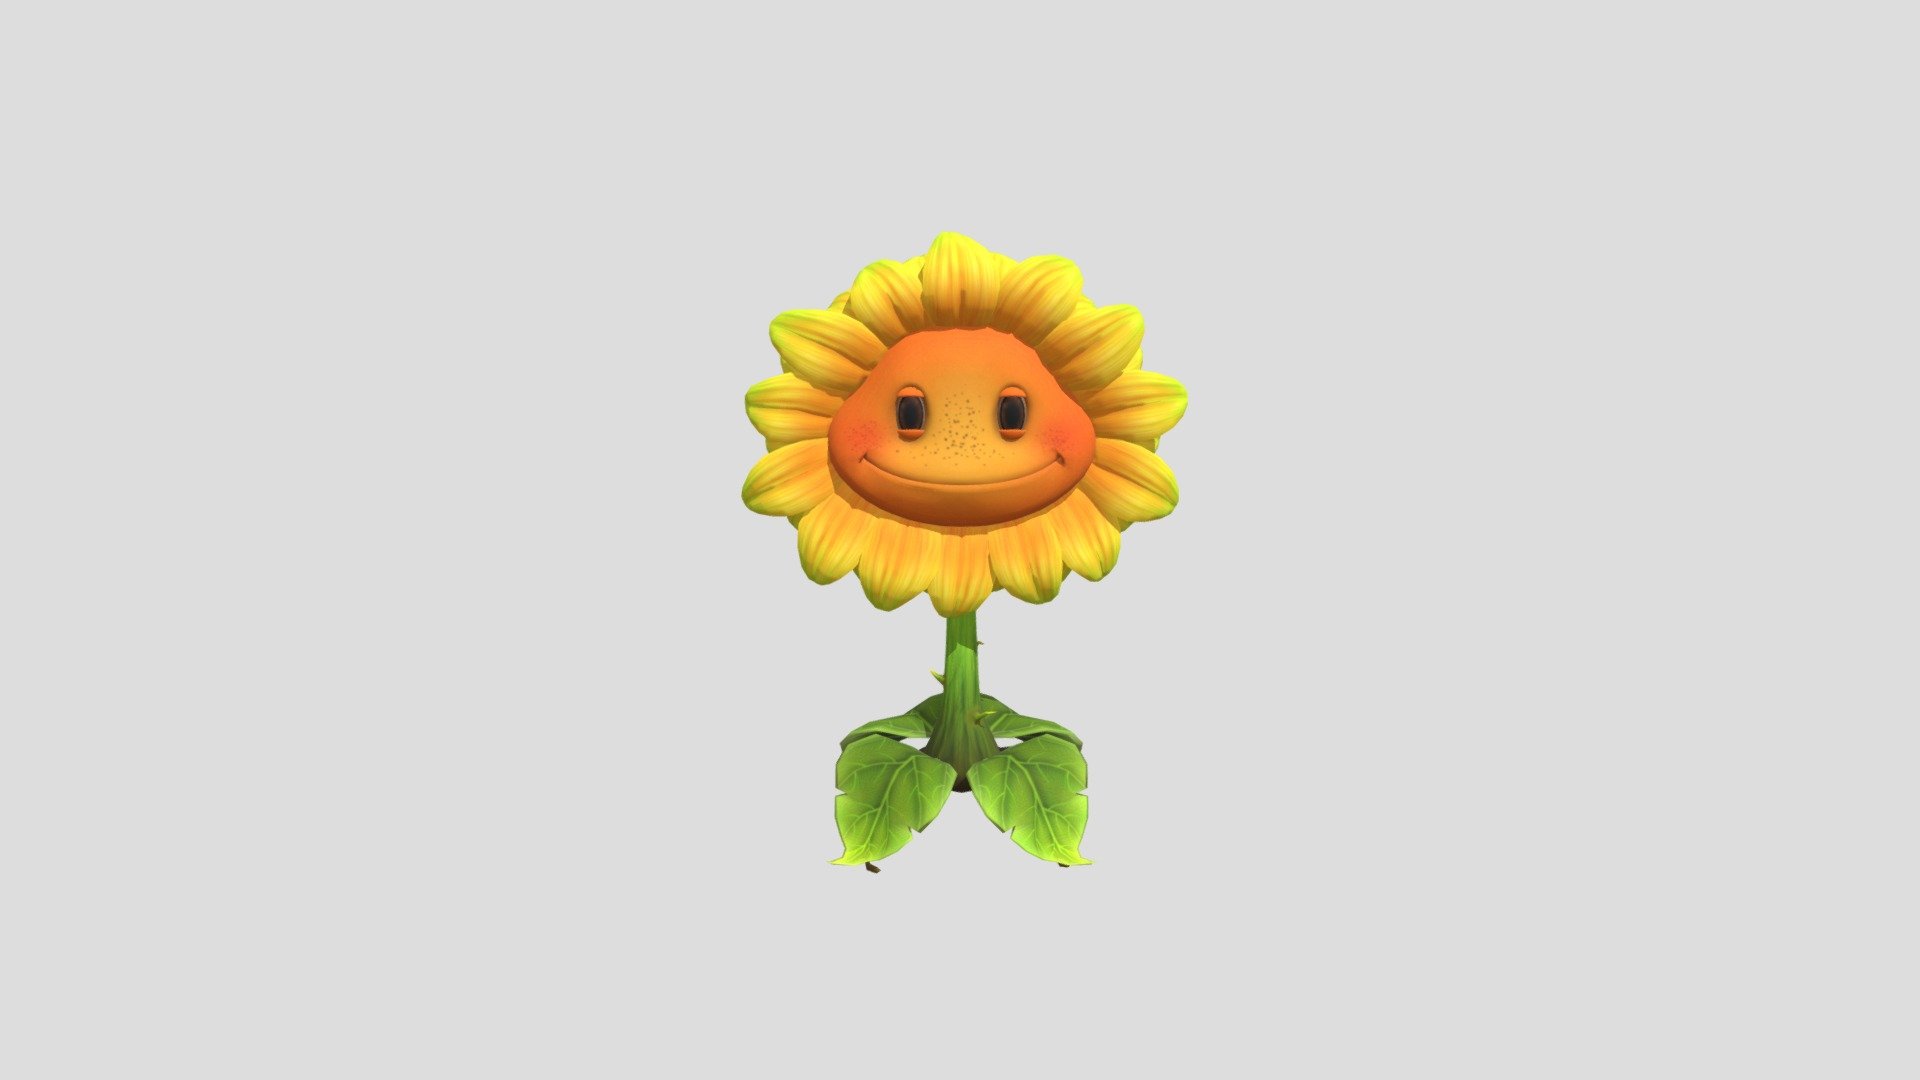 Sunflower Plants Vs Zombies, Plants Vs Zombies Garden Warfare, Plants Vs  Zombies Garden Warfare 2, Plants Vs Zombies 2 Its About Time, Video Games,  Electronic Arts, Xbox 360, Peashooter transparent background PNG clipart